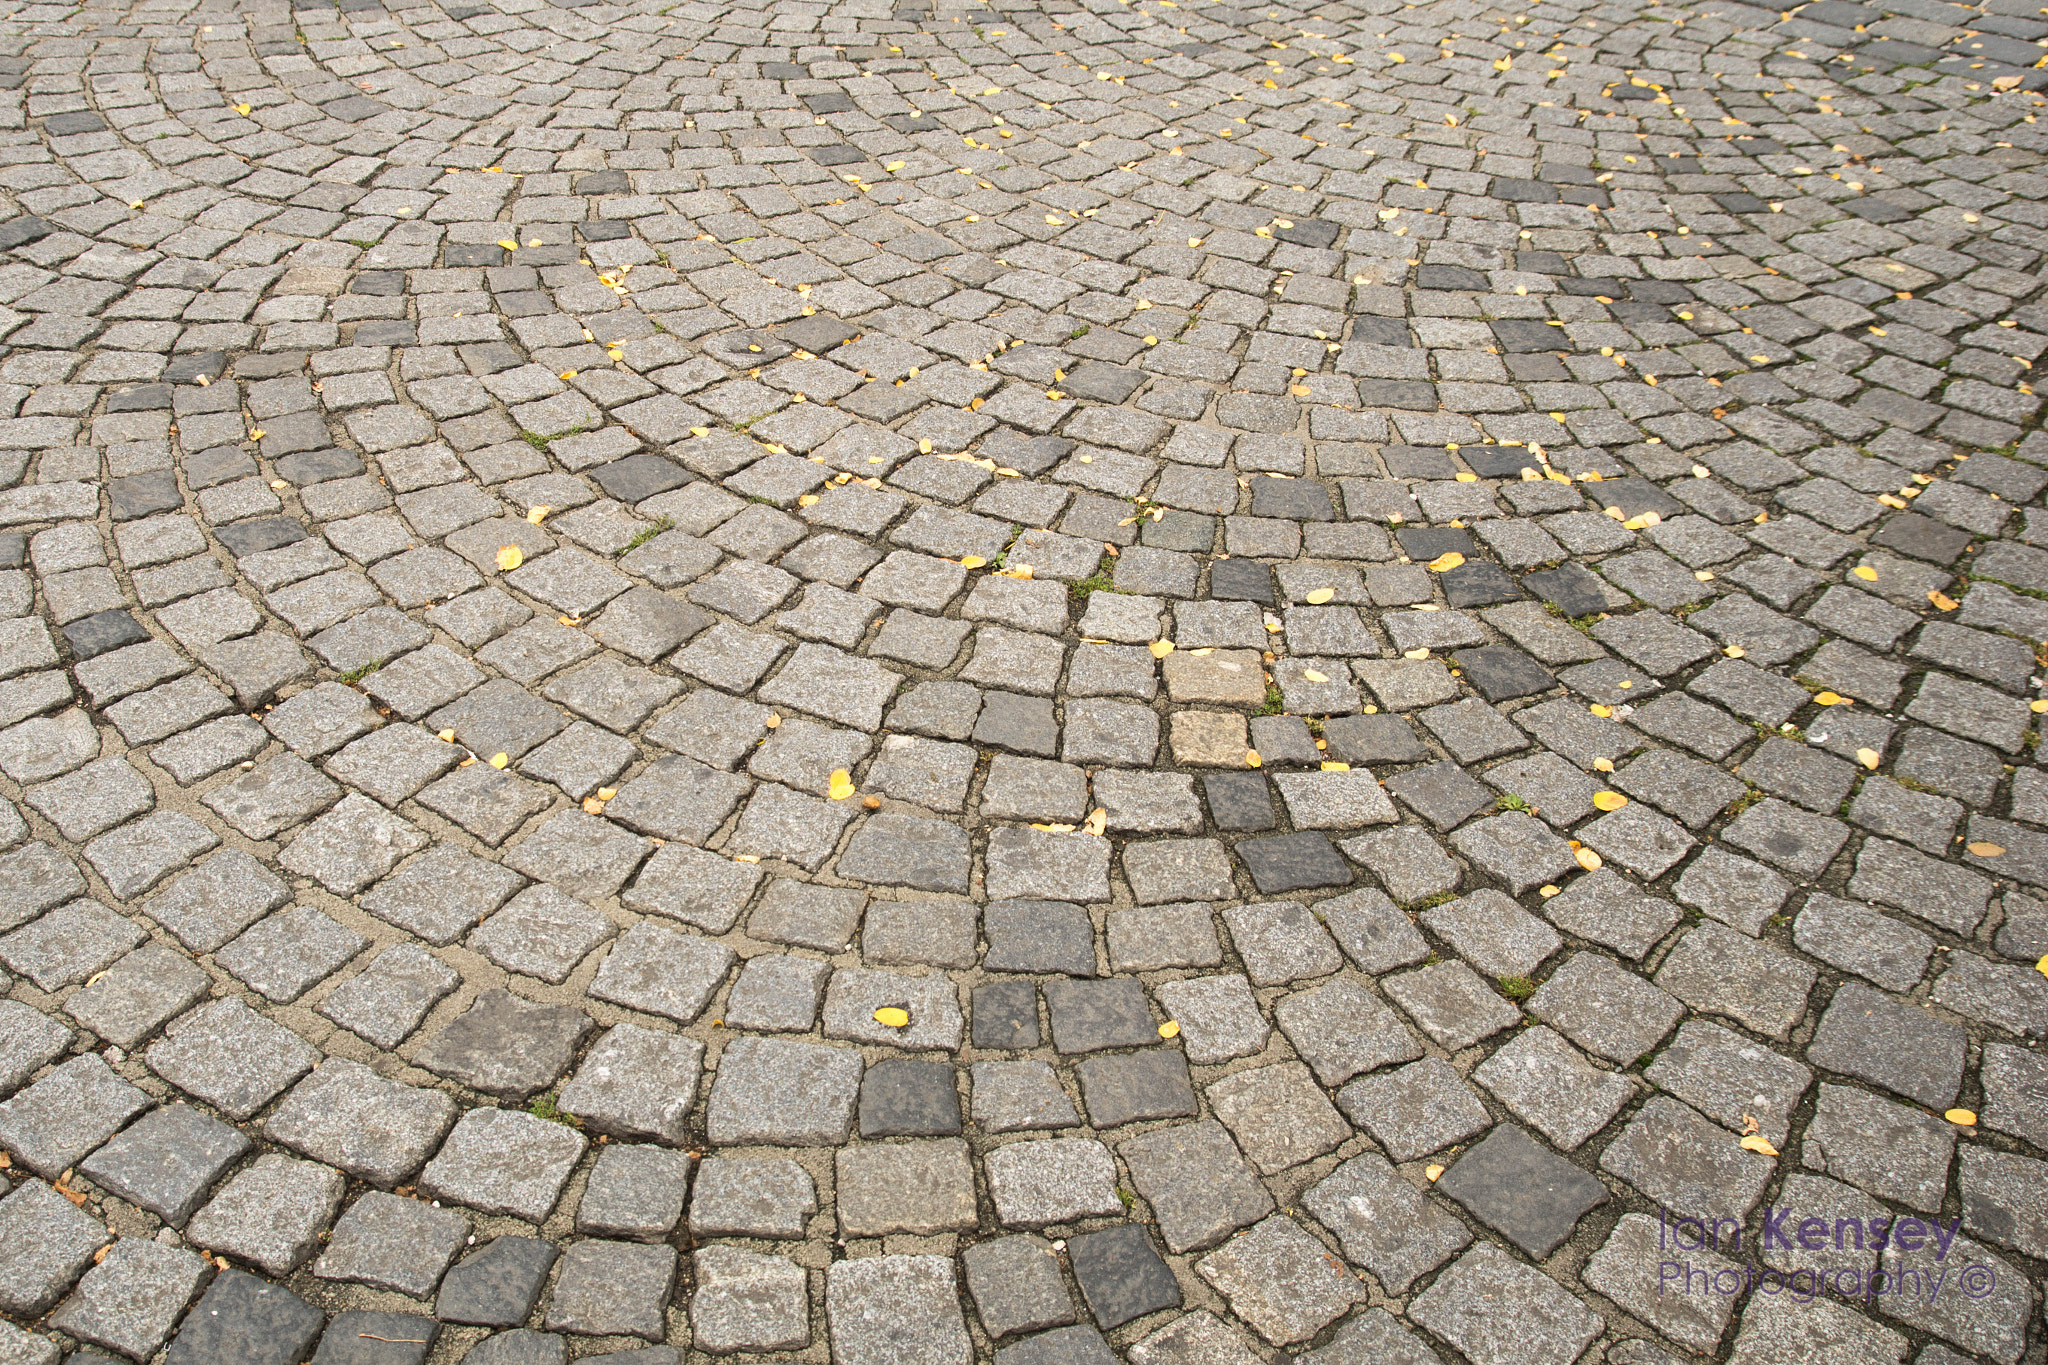 Tamron SP AF 17-50mm F2.8 XR Di II LD Aspherical (IF) sample photo. The radiant cobblestones photography